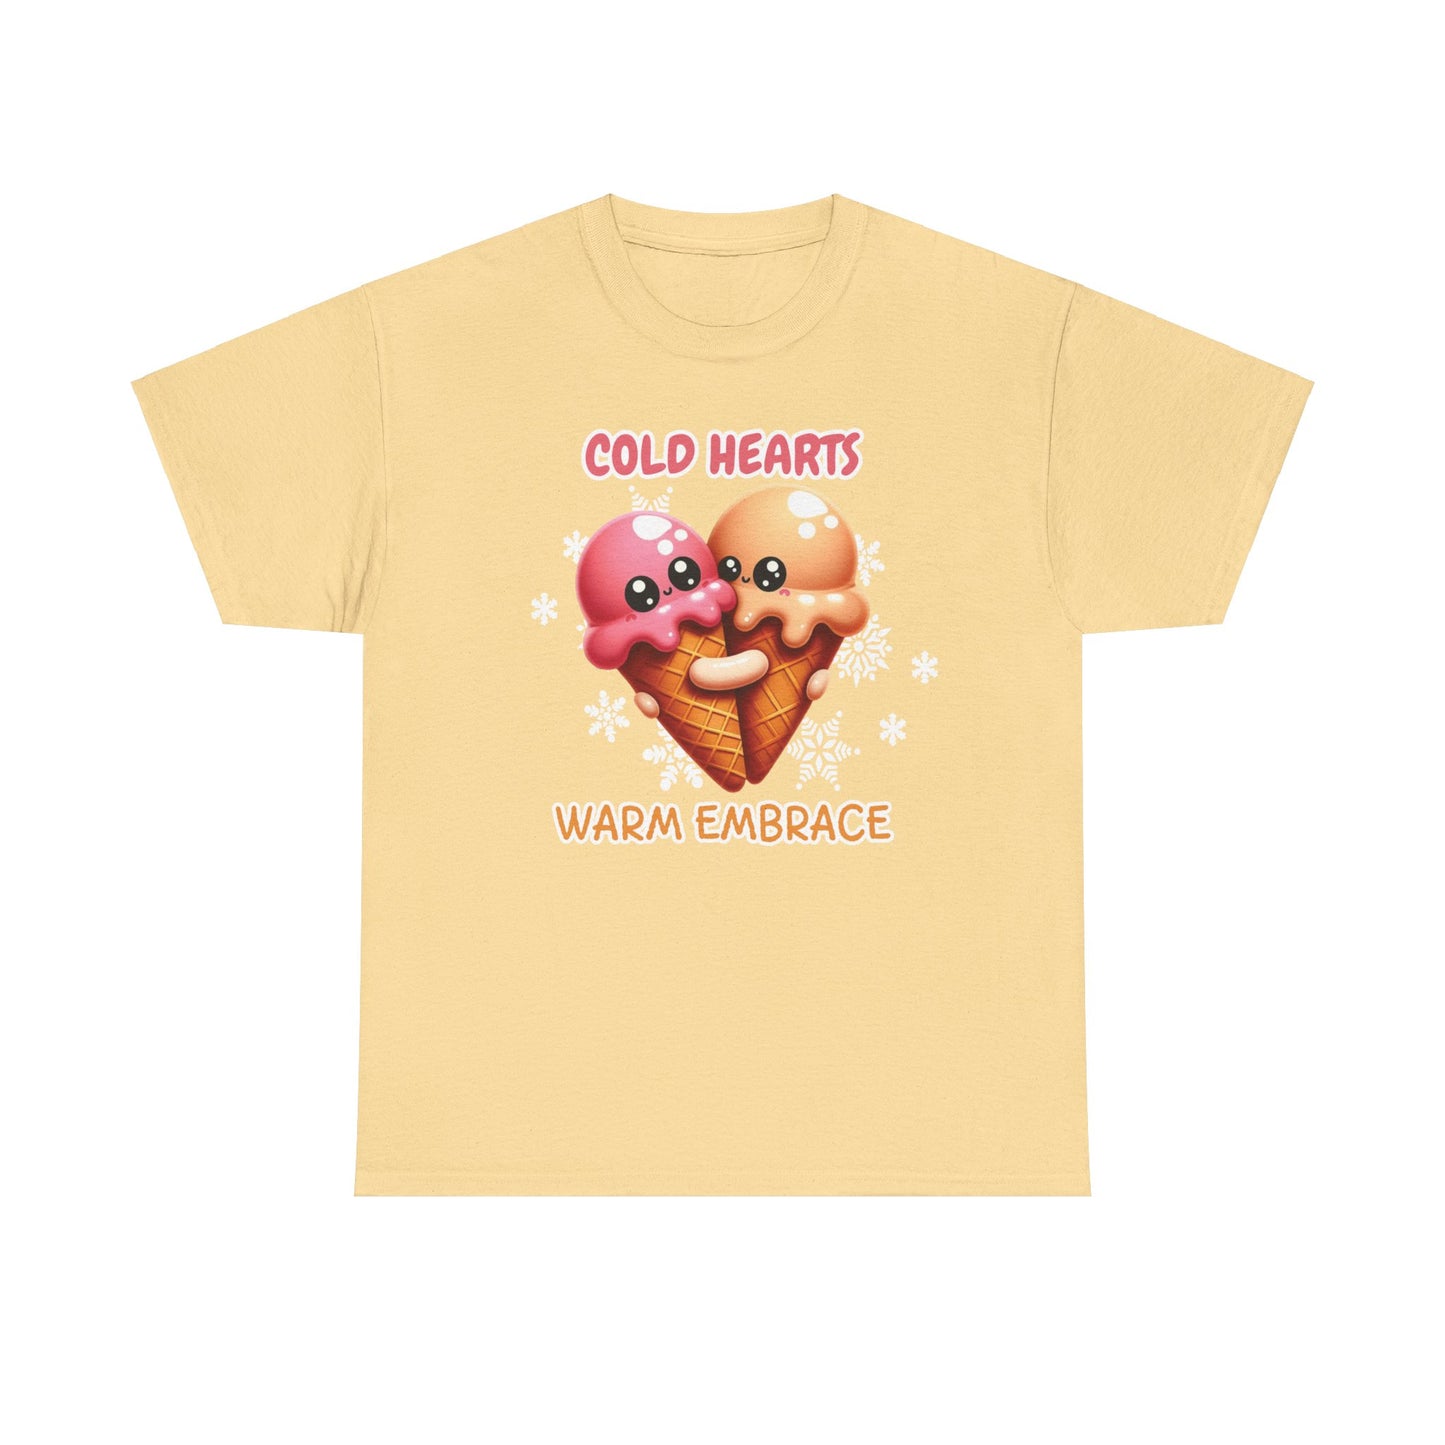 Cold hearts, warm embrace - Unisex Heavy Cotton Tee